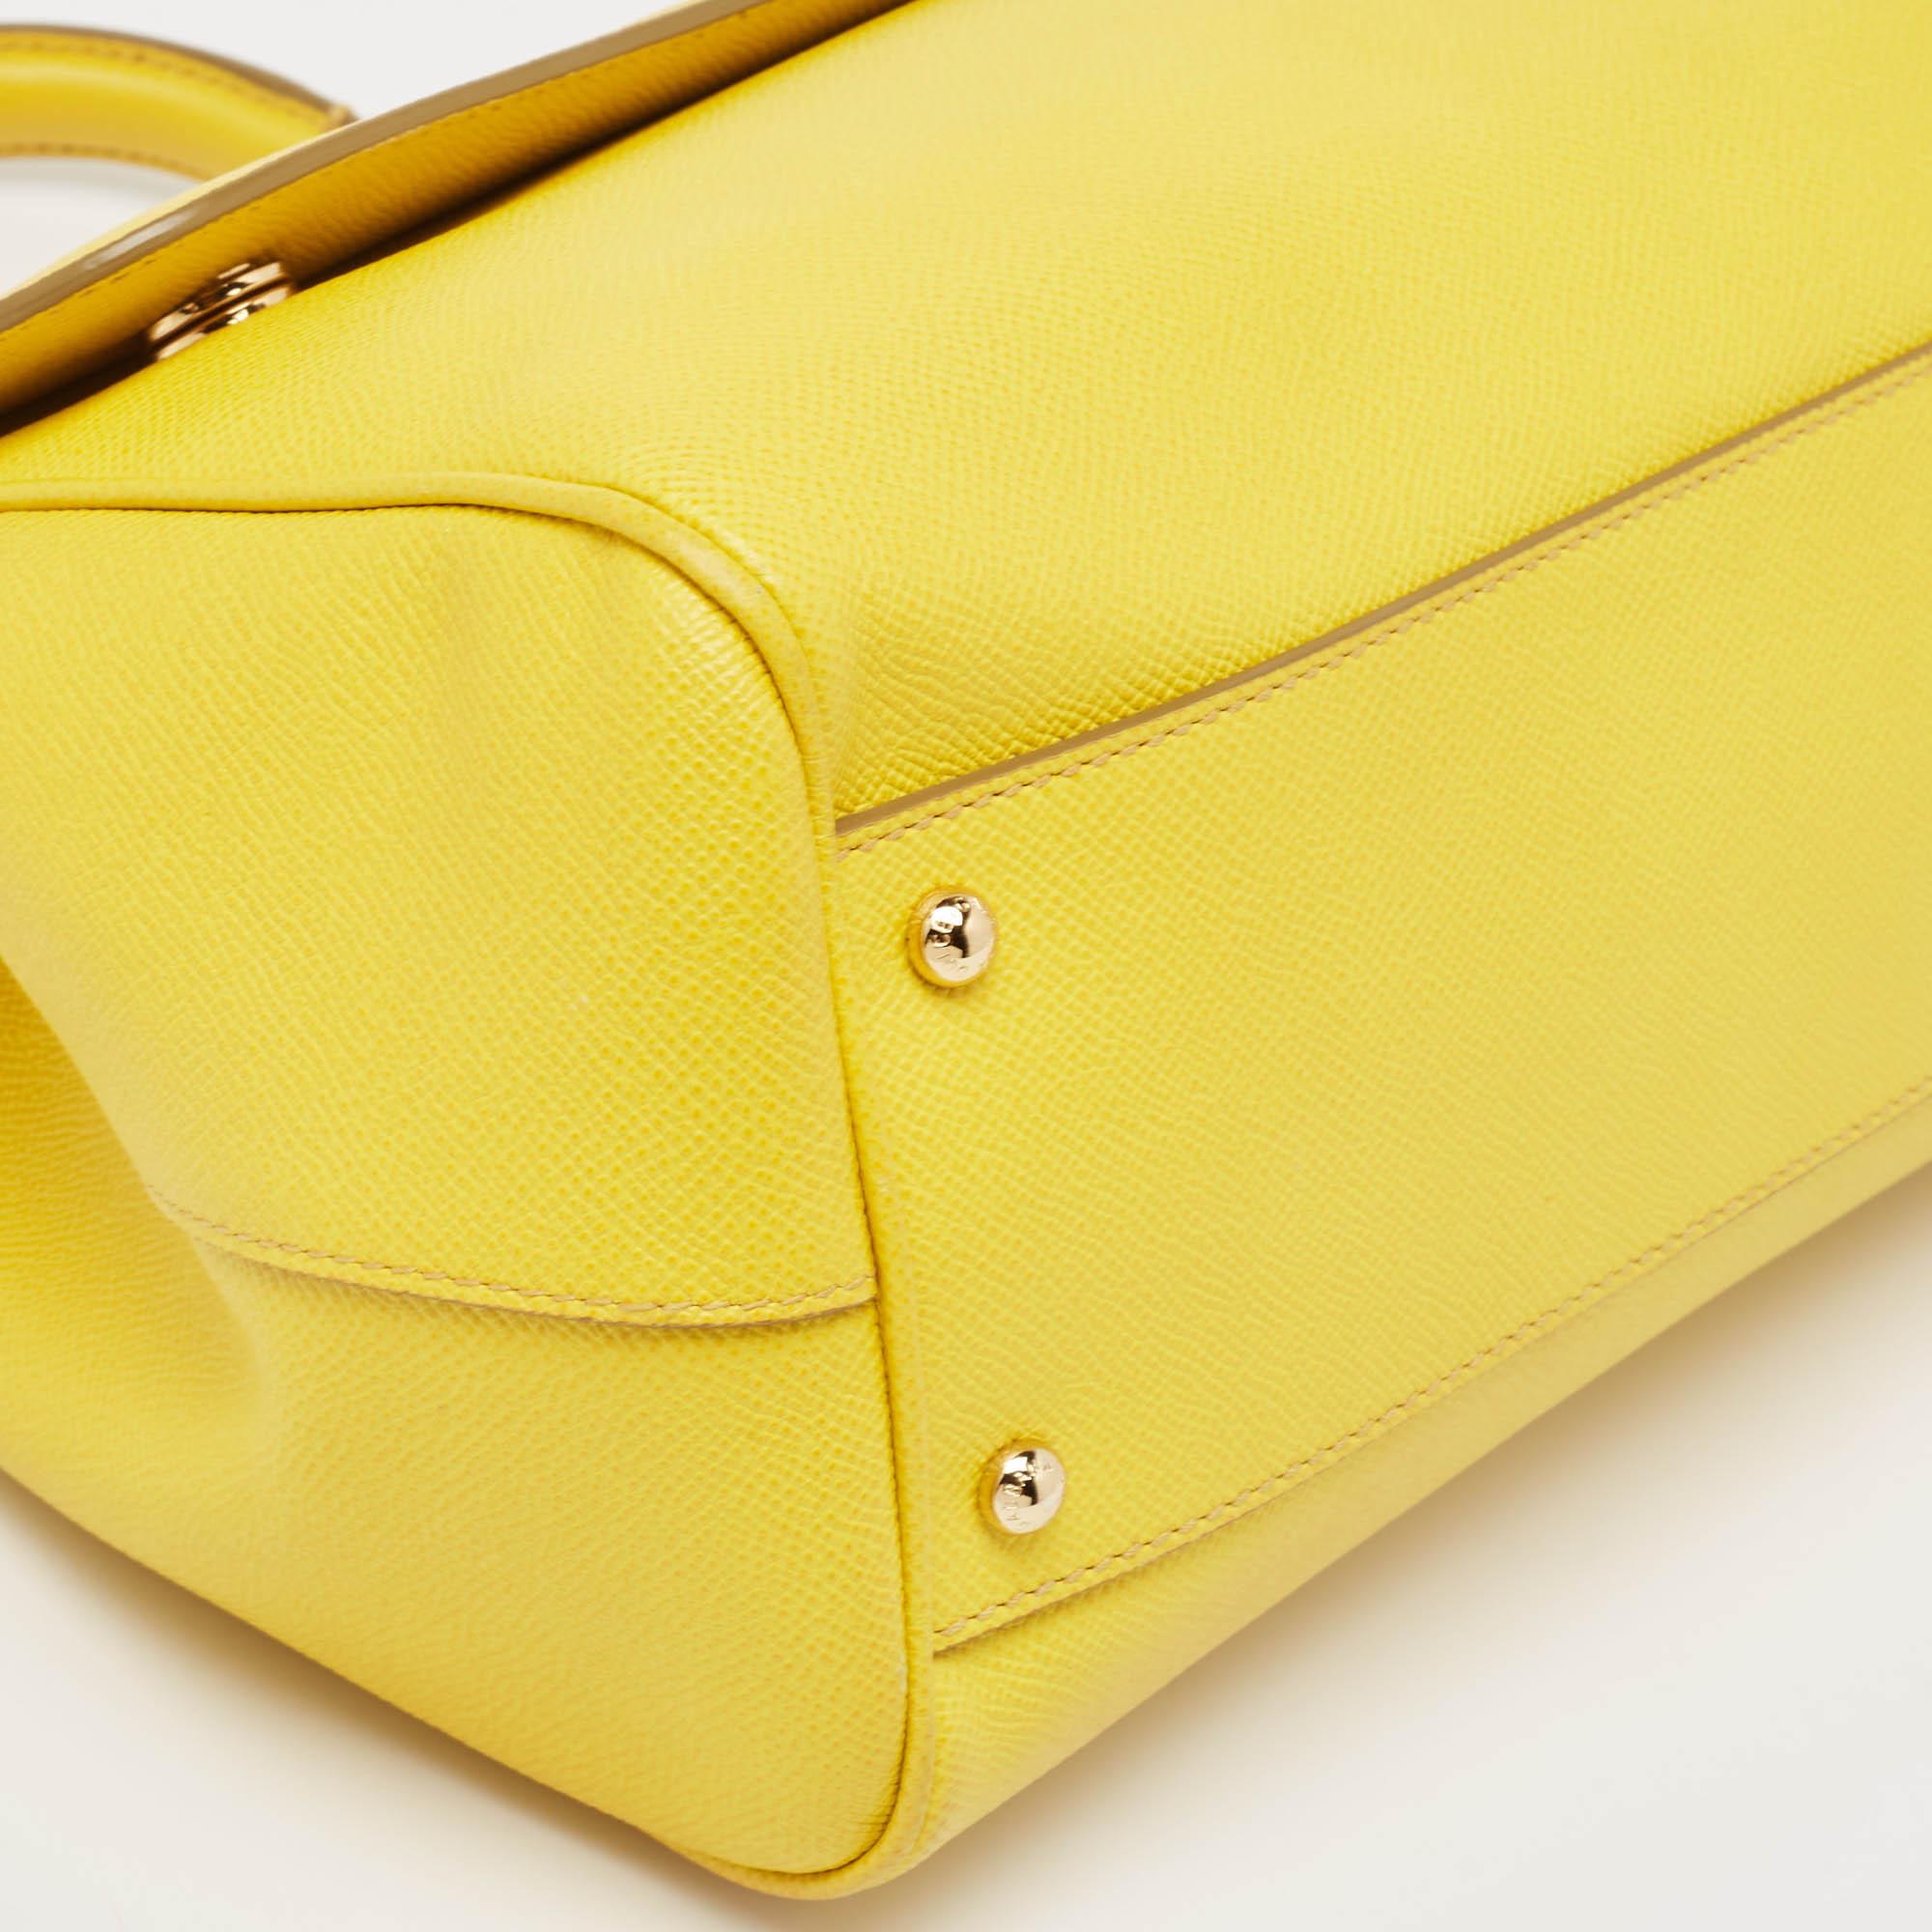 Dolce & Gabbana Yellow Leather Large Miss Sicily Top Handle Bag In Good Condition In Dubai, Al Qouz 2